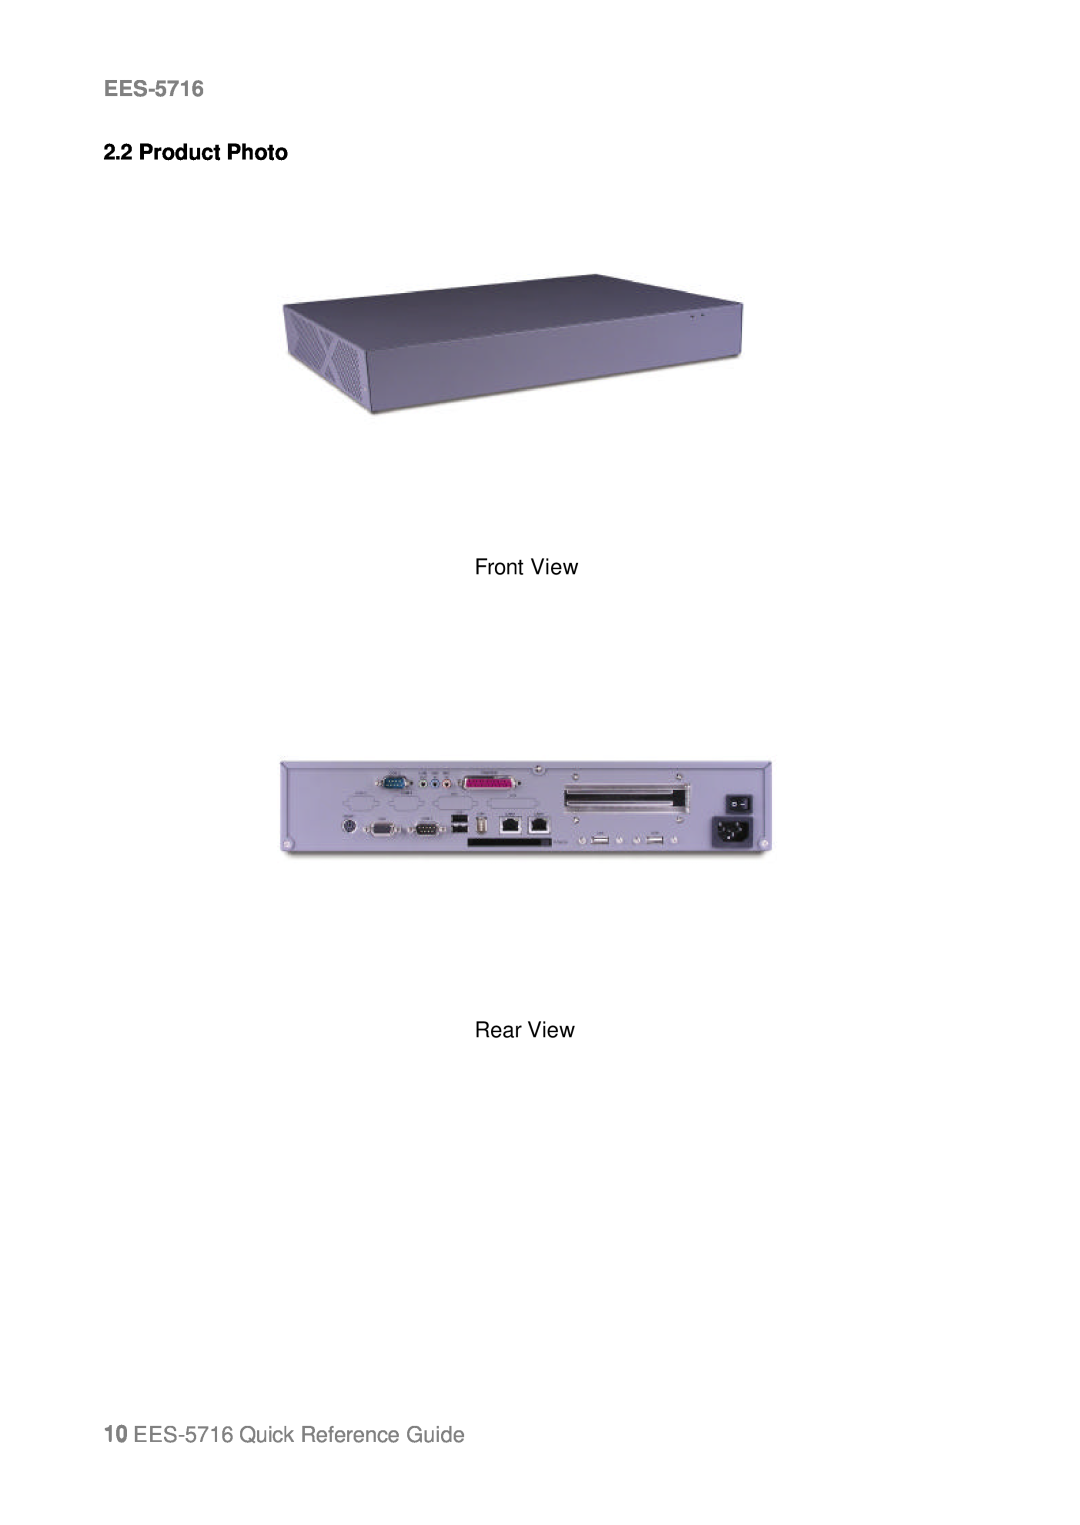 Intel Intel Pentium M/Celeron M Processors Mini PC Product Photo, EES-5716Quick Reference Guide, Front View Rear View 